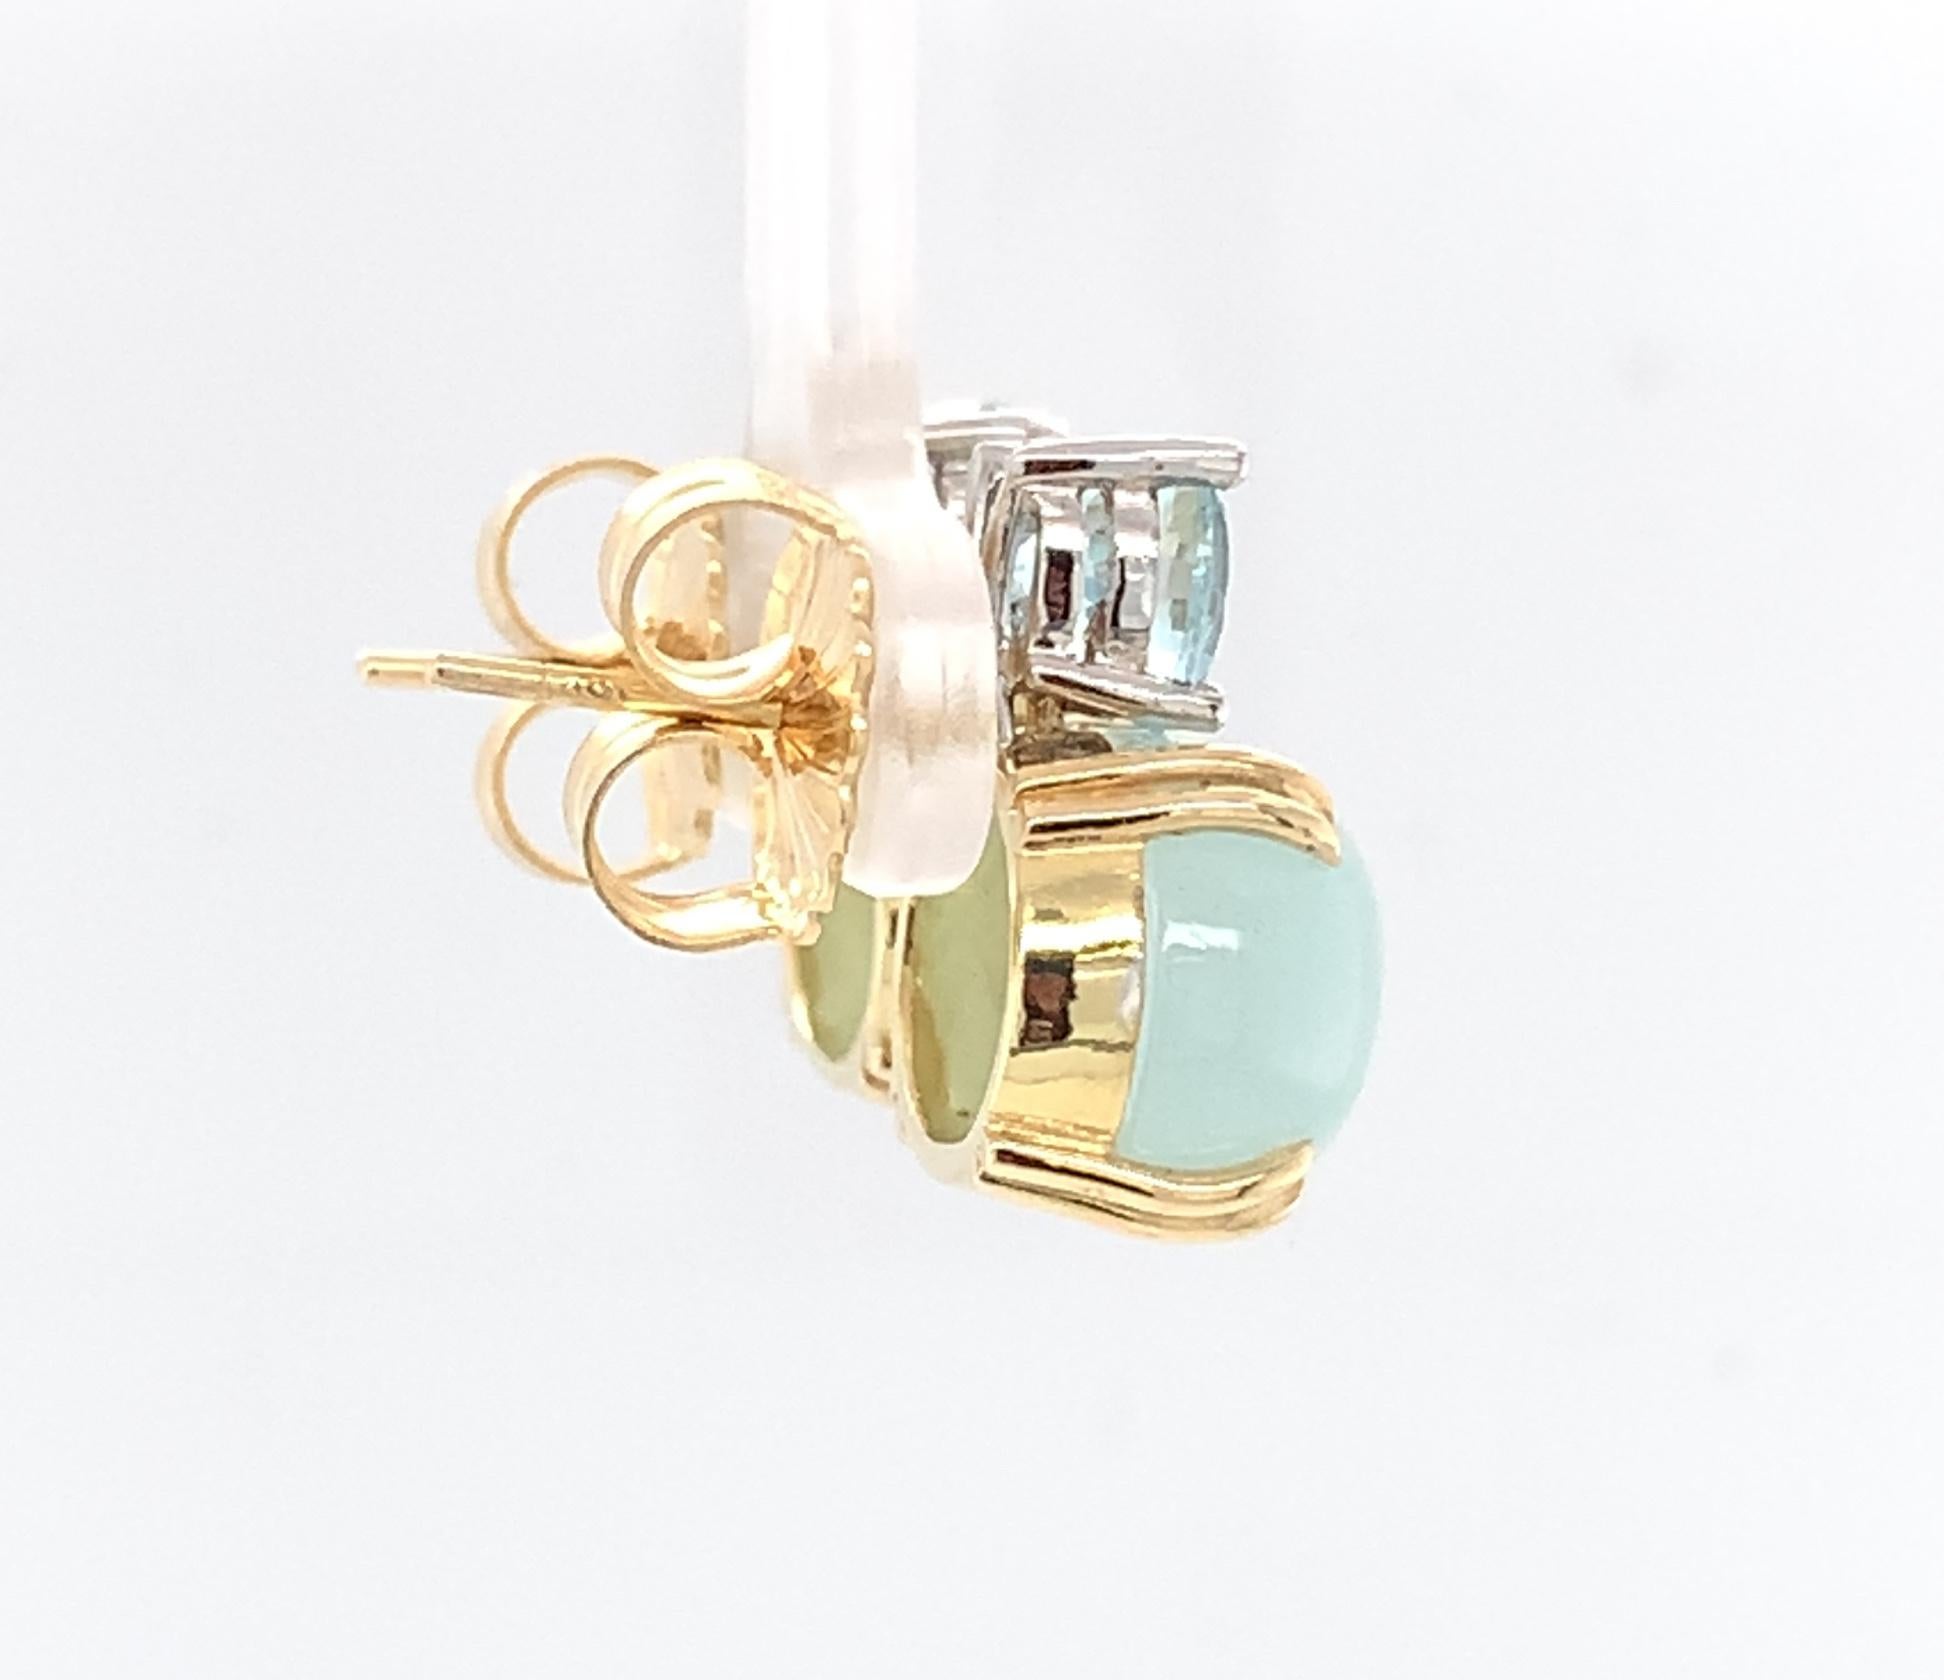 Faceted and Cabochon Aquamarine Drop Earrings in White and Yellow Gold 4